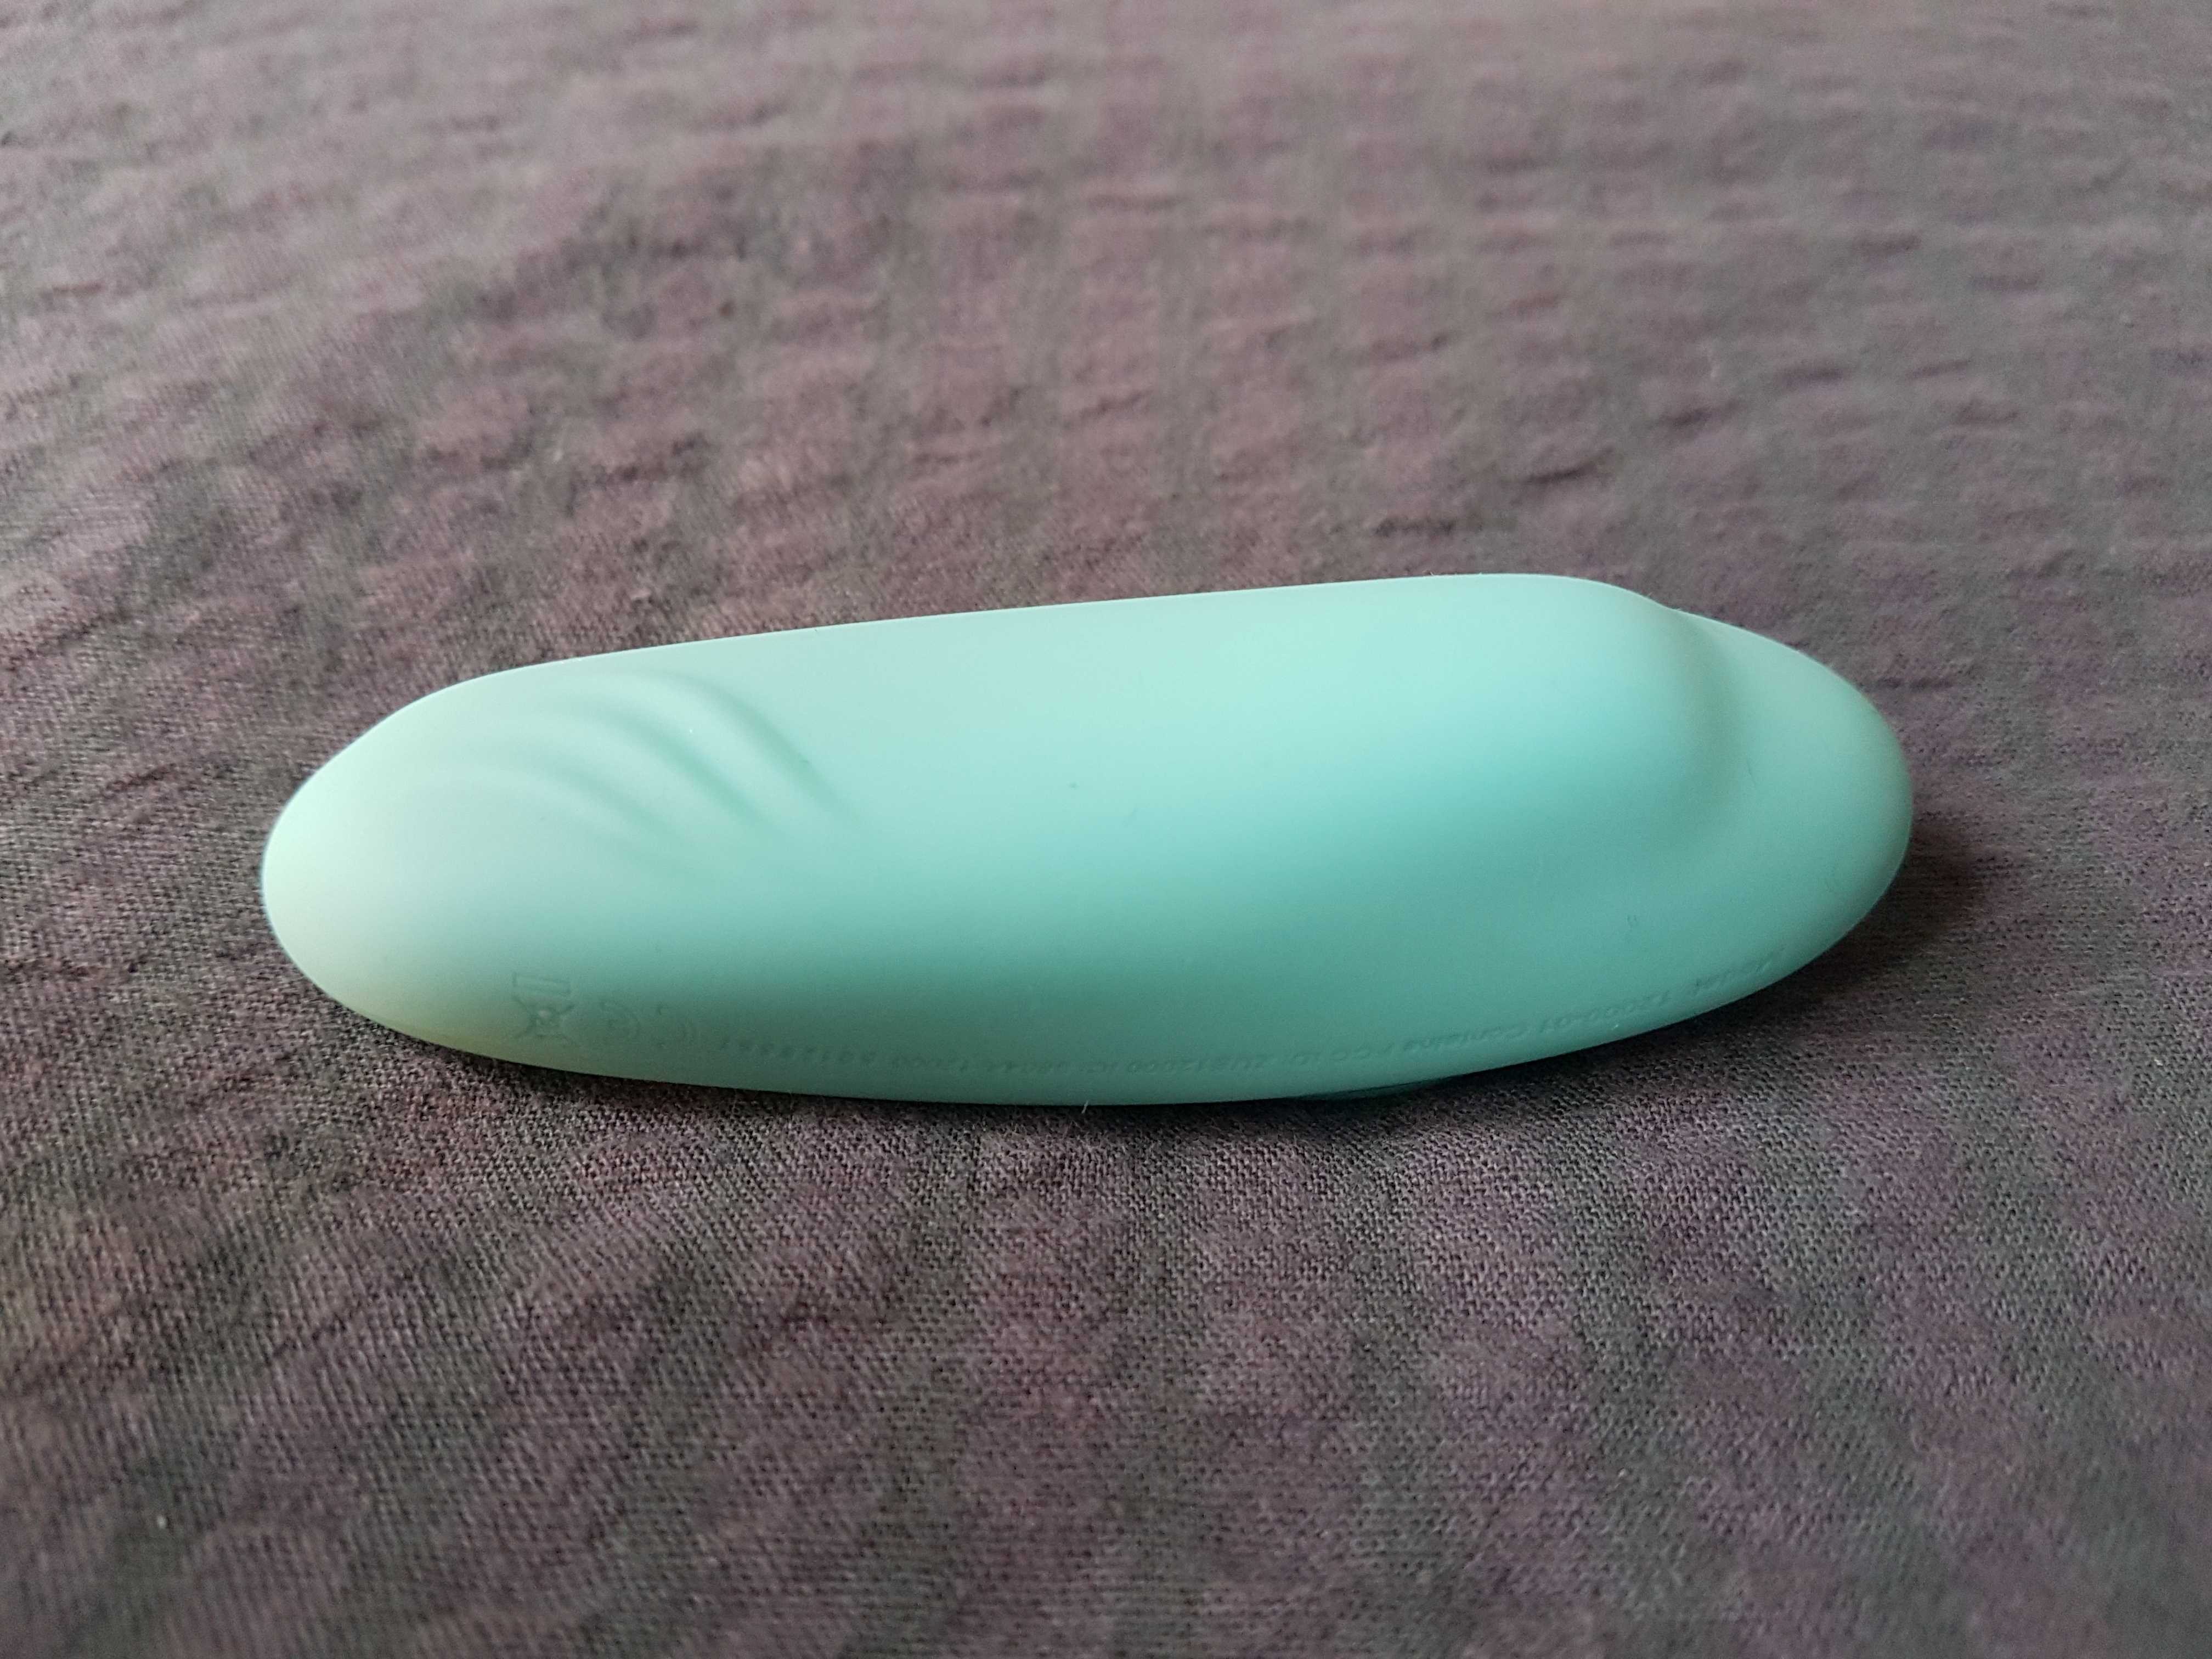 We-Vibe Moxie Does it Deliver on Pleasure?